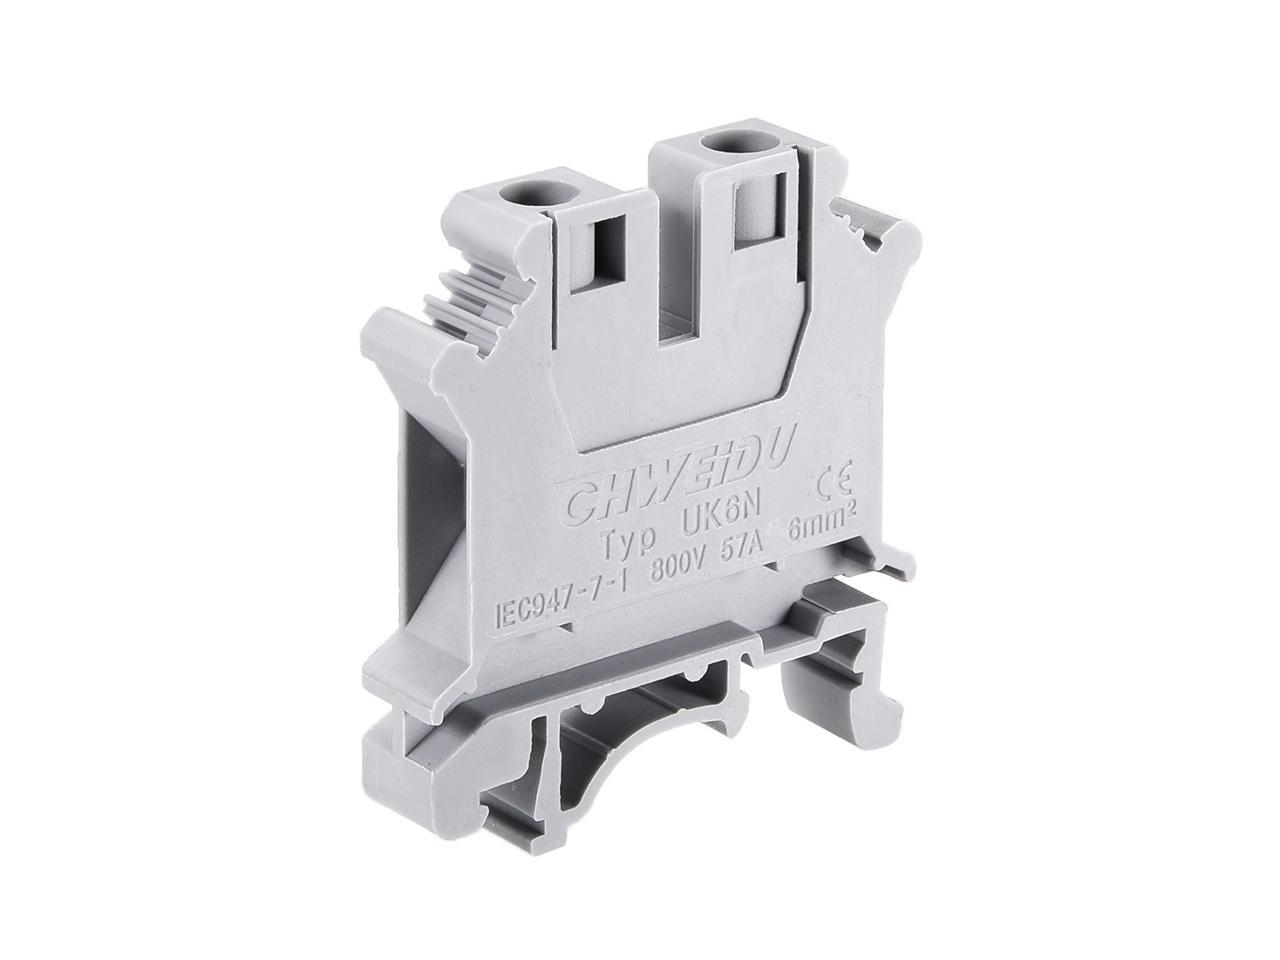 10 Pcs USLKG2.5N DIN Rail Mounted Ground Circuit Connection Terminal Block Screw Clamp 690V 34A 